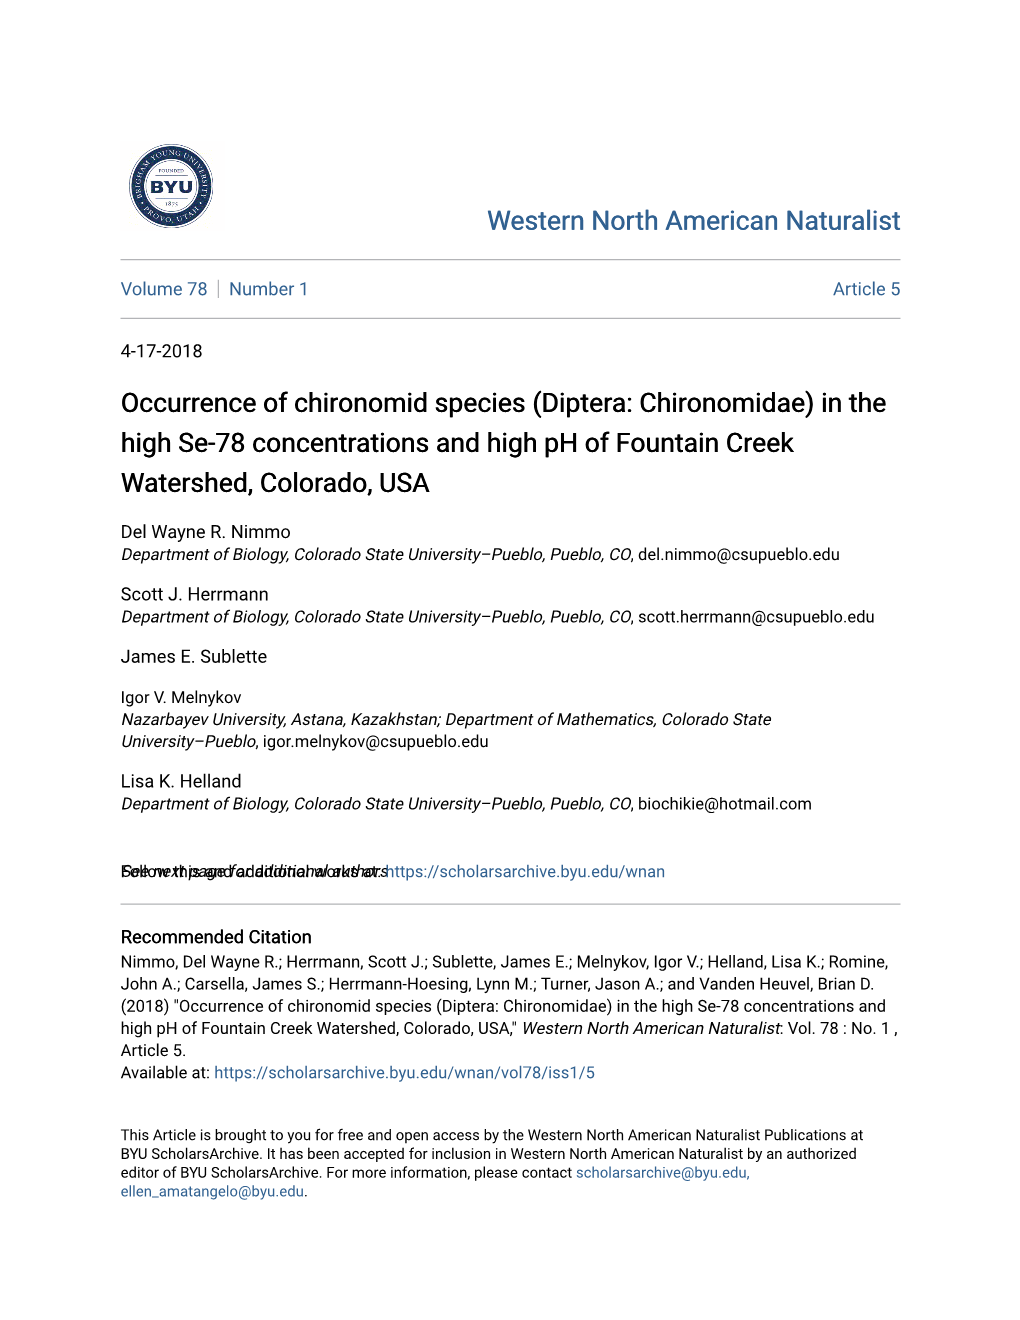 Diptera: Chironomidae) in the High Se-78 Concentrations and High Ph of Fountain Creek Watershed, Colorado, USA